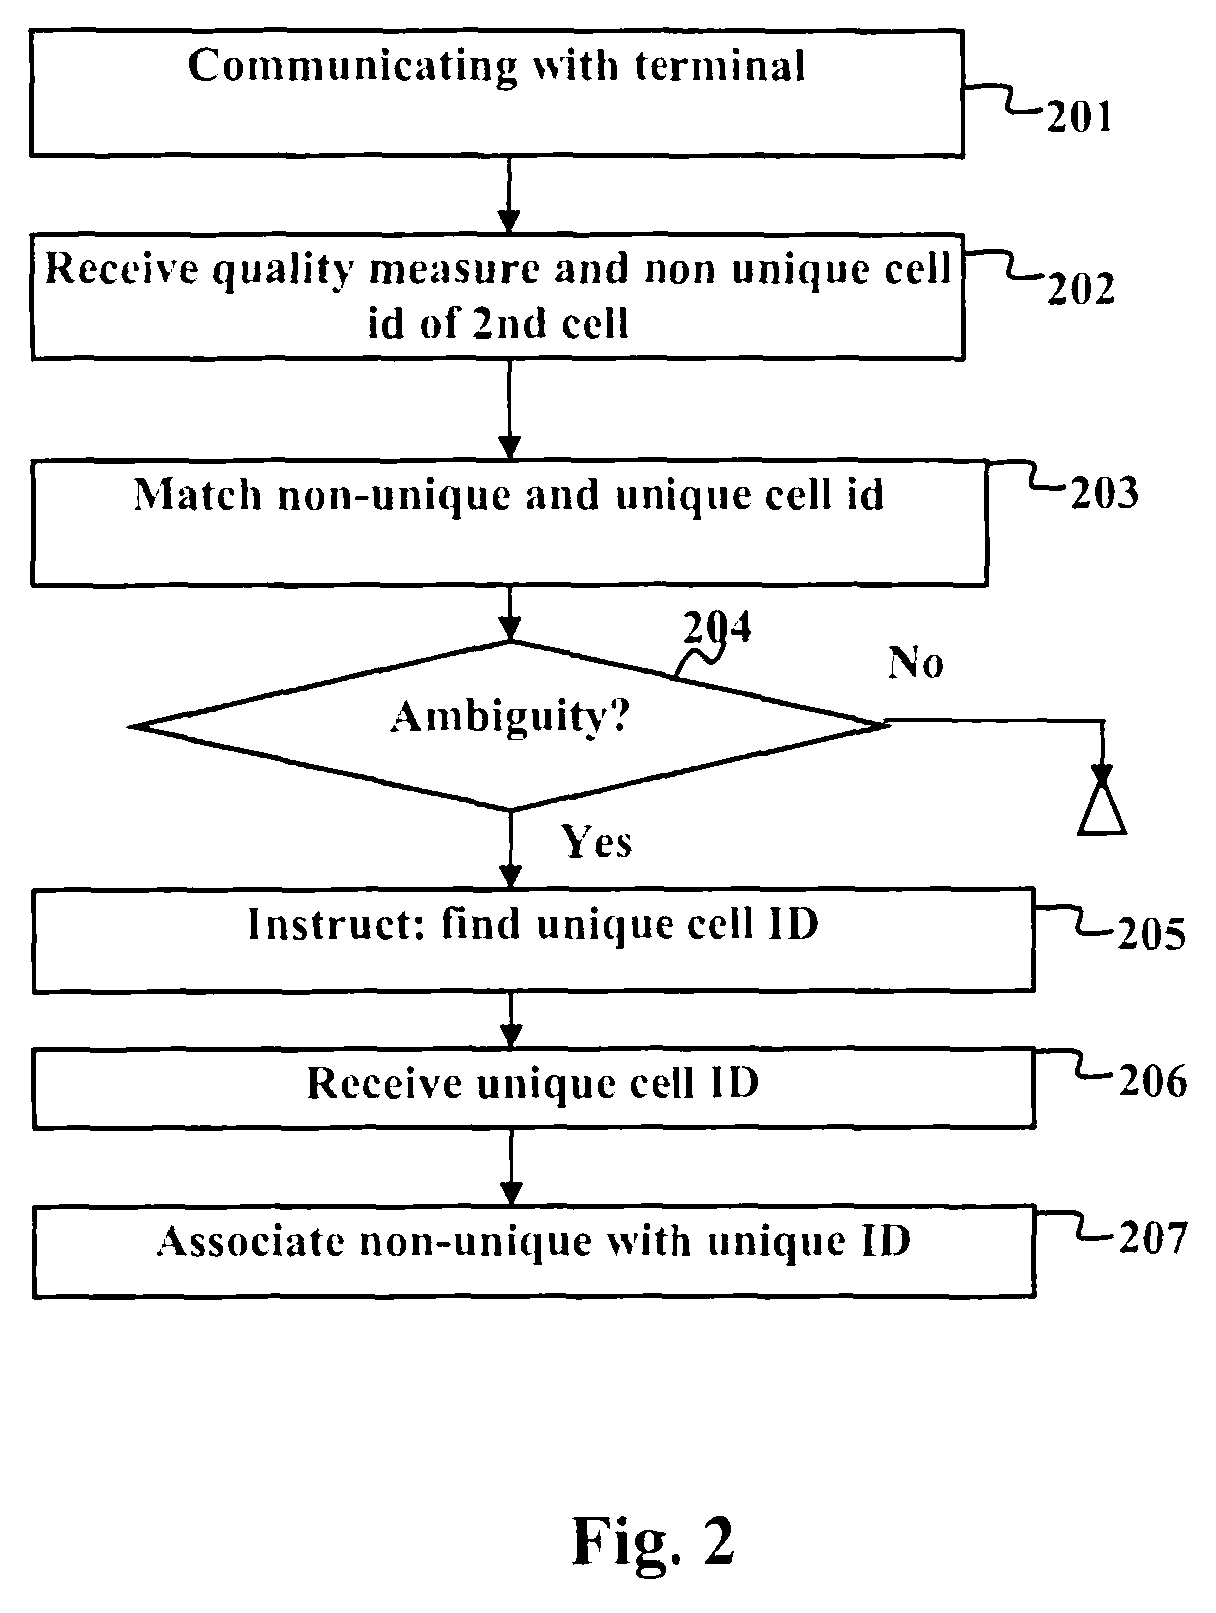 Self configuring and optimization of cell neighbors in wireless telecommunications networks